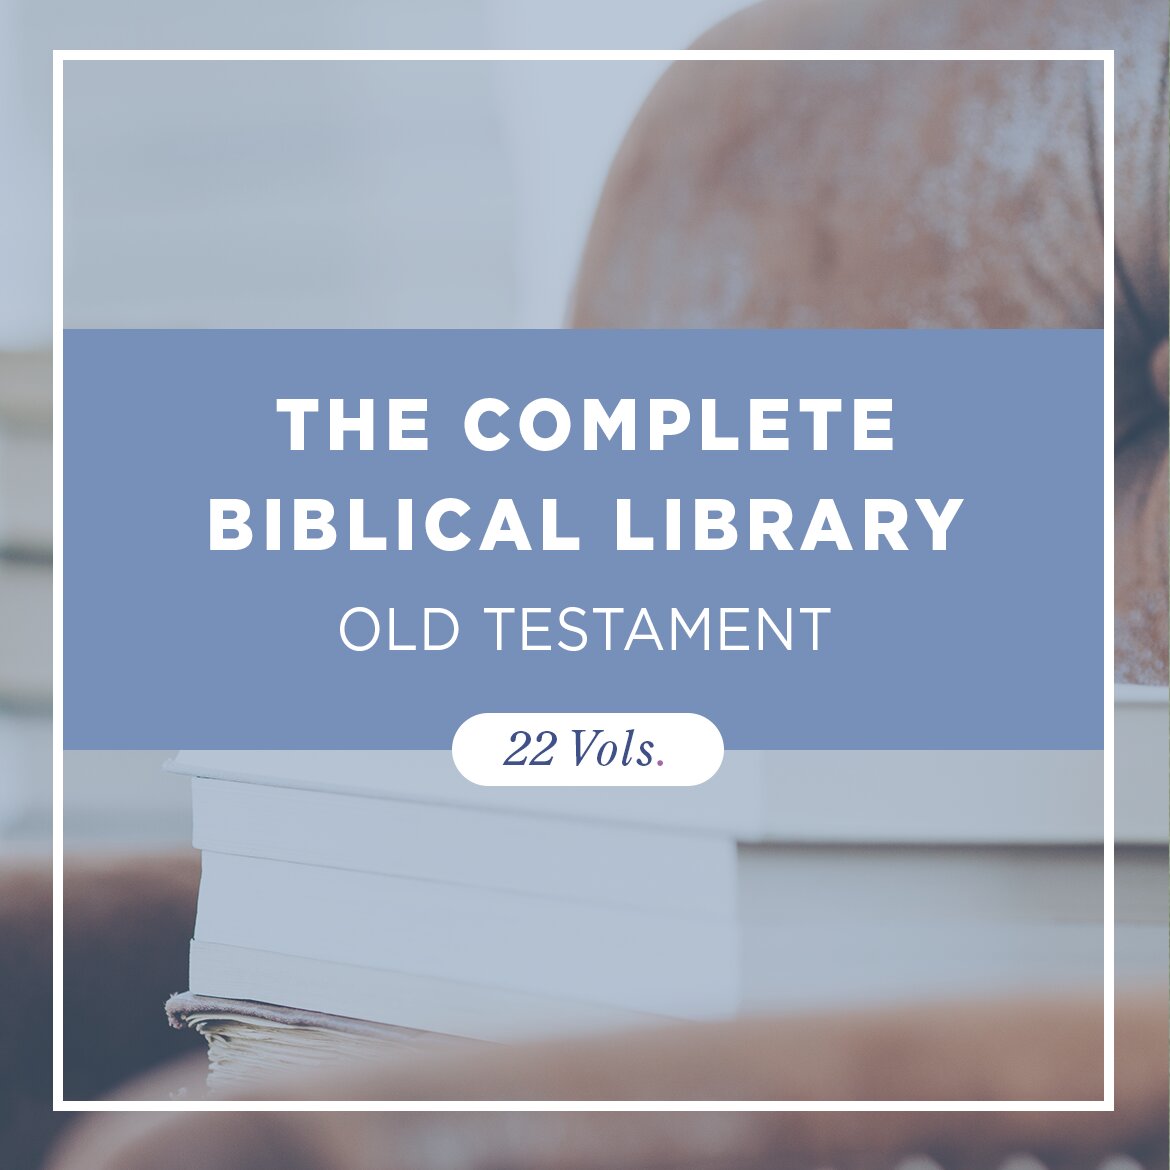 Old Testament, 22 vols. (The Complete Biblical Library | CBL)